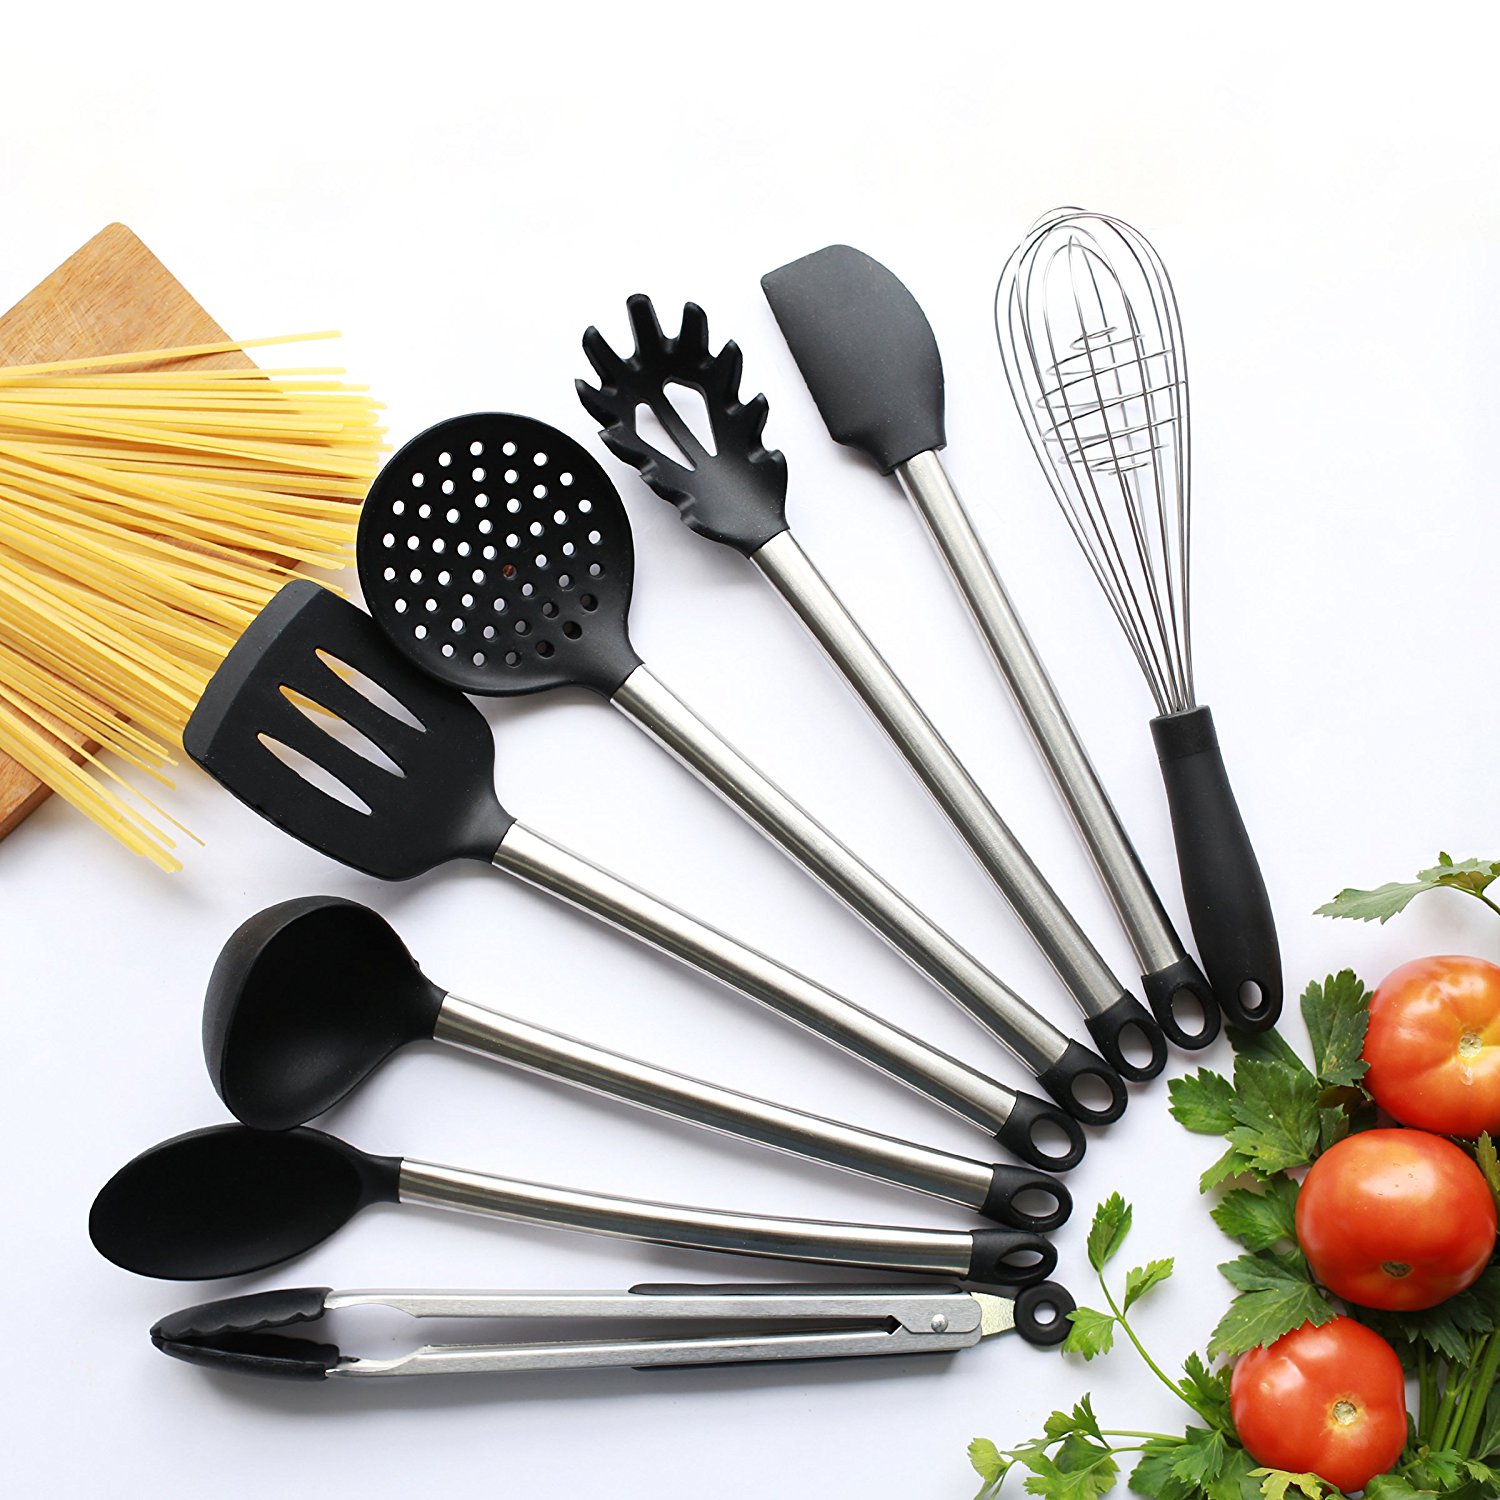 8 Piece kitchen utensils set of Stainless Steel and Black Silicon